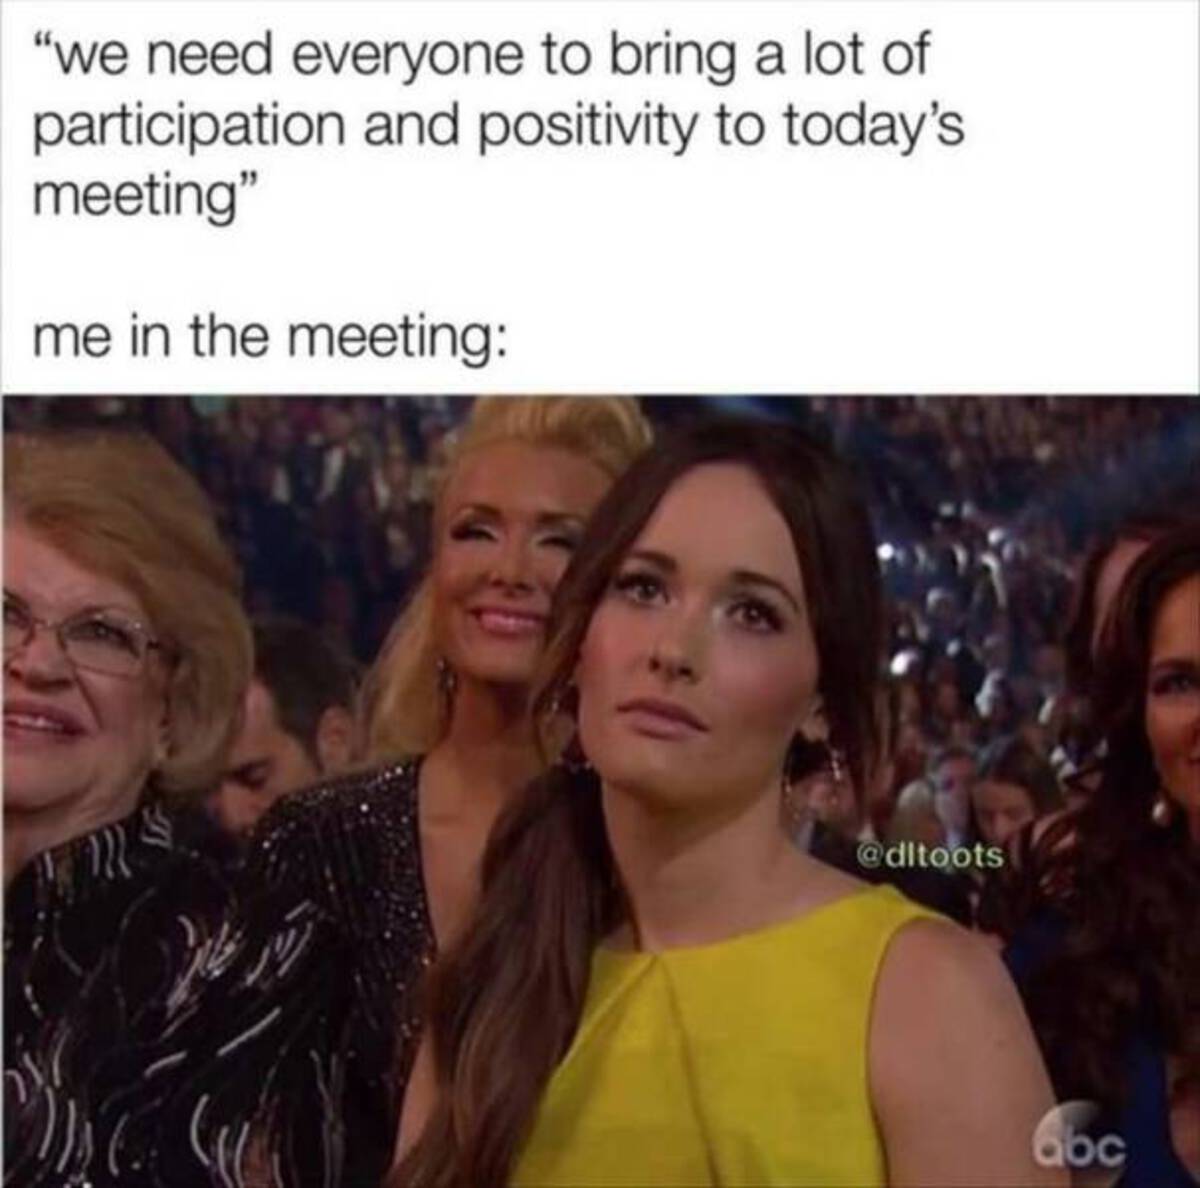 kacey musgraves unimpressed - "we need everyone to bring a lot of participation and positivity to today's meeting" me in the meeting abc